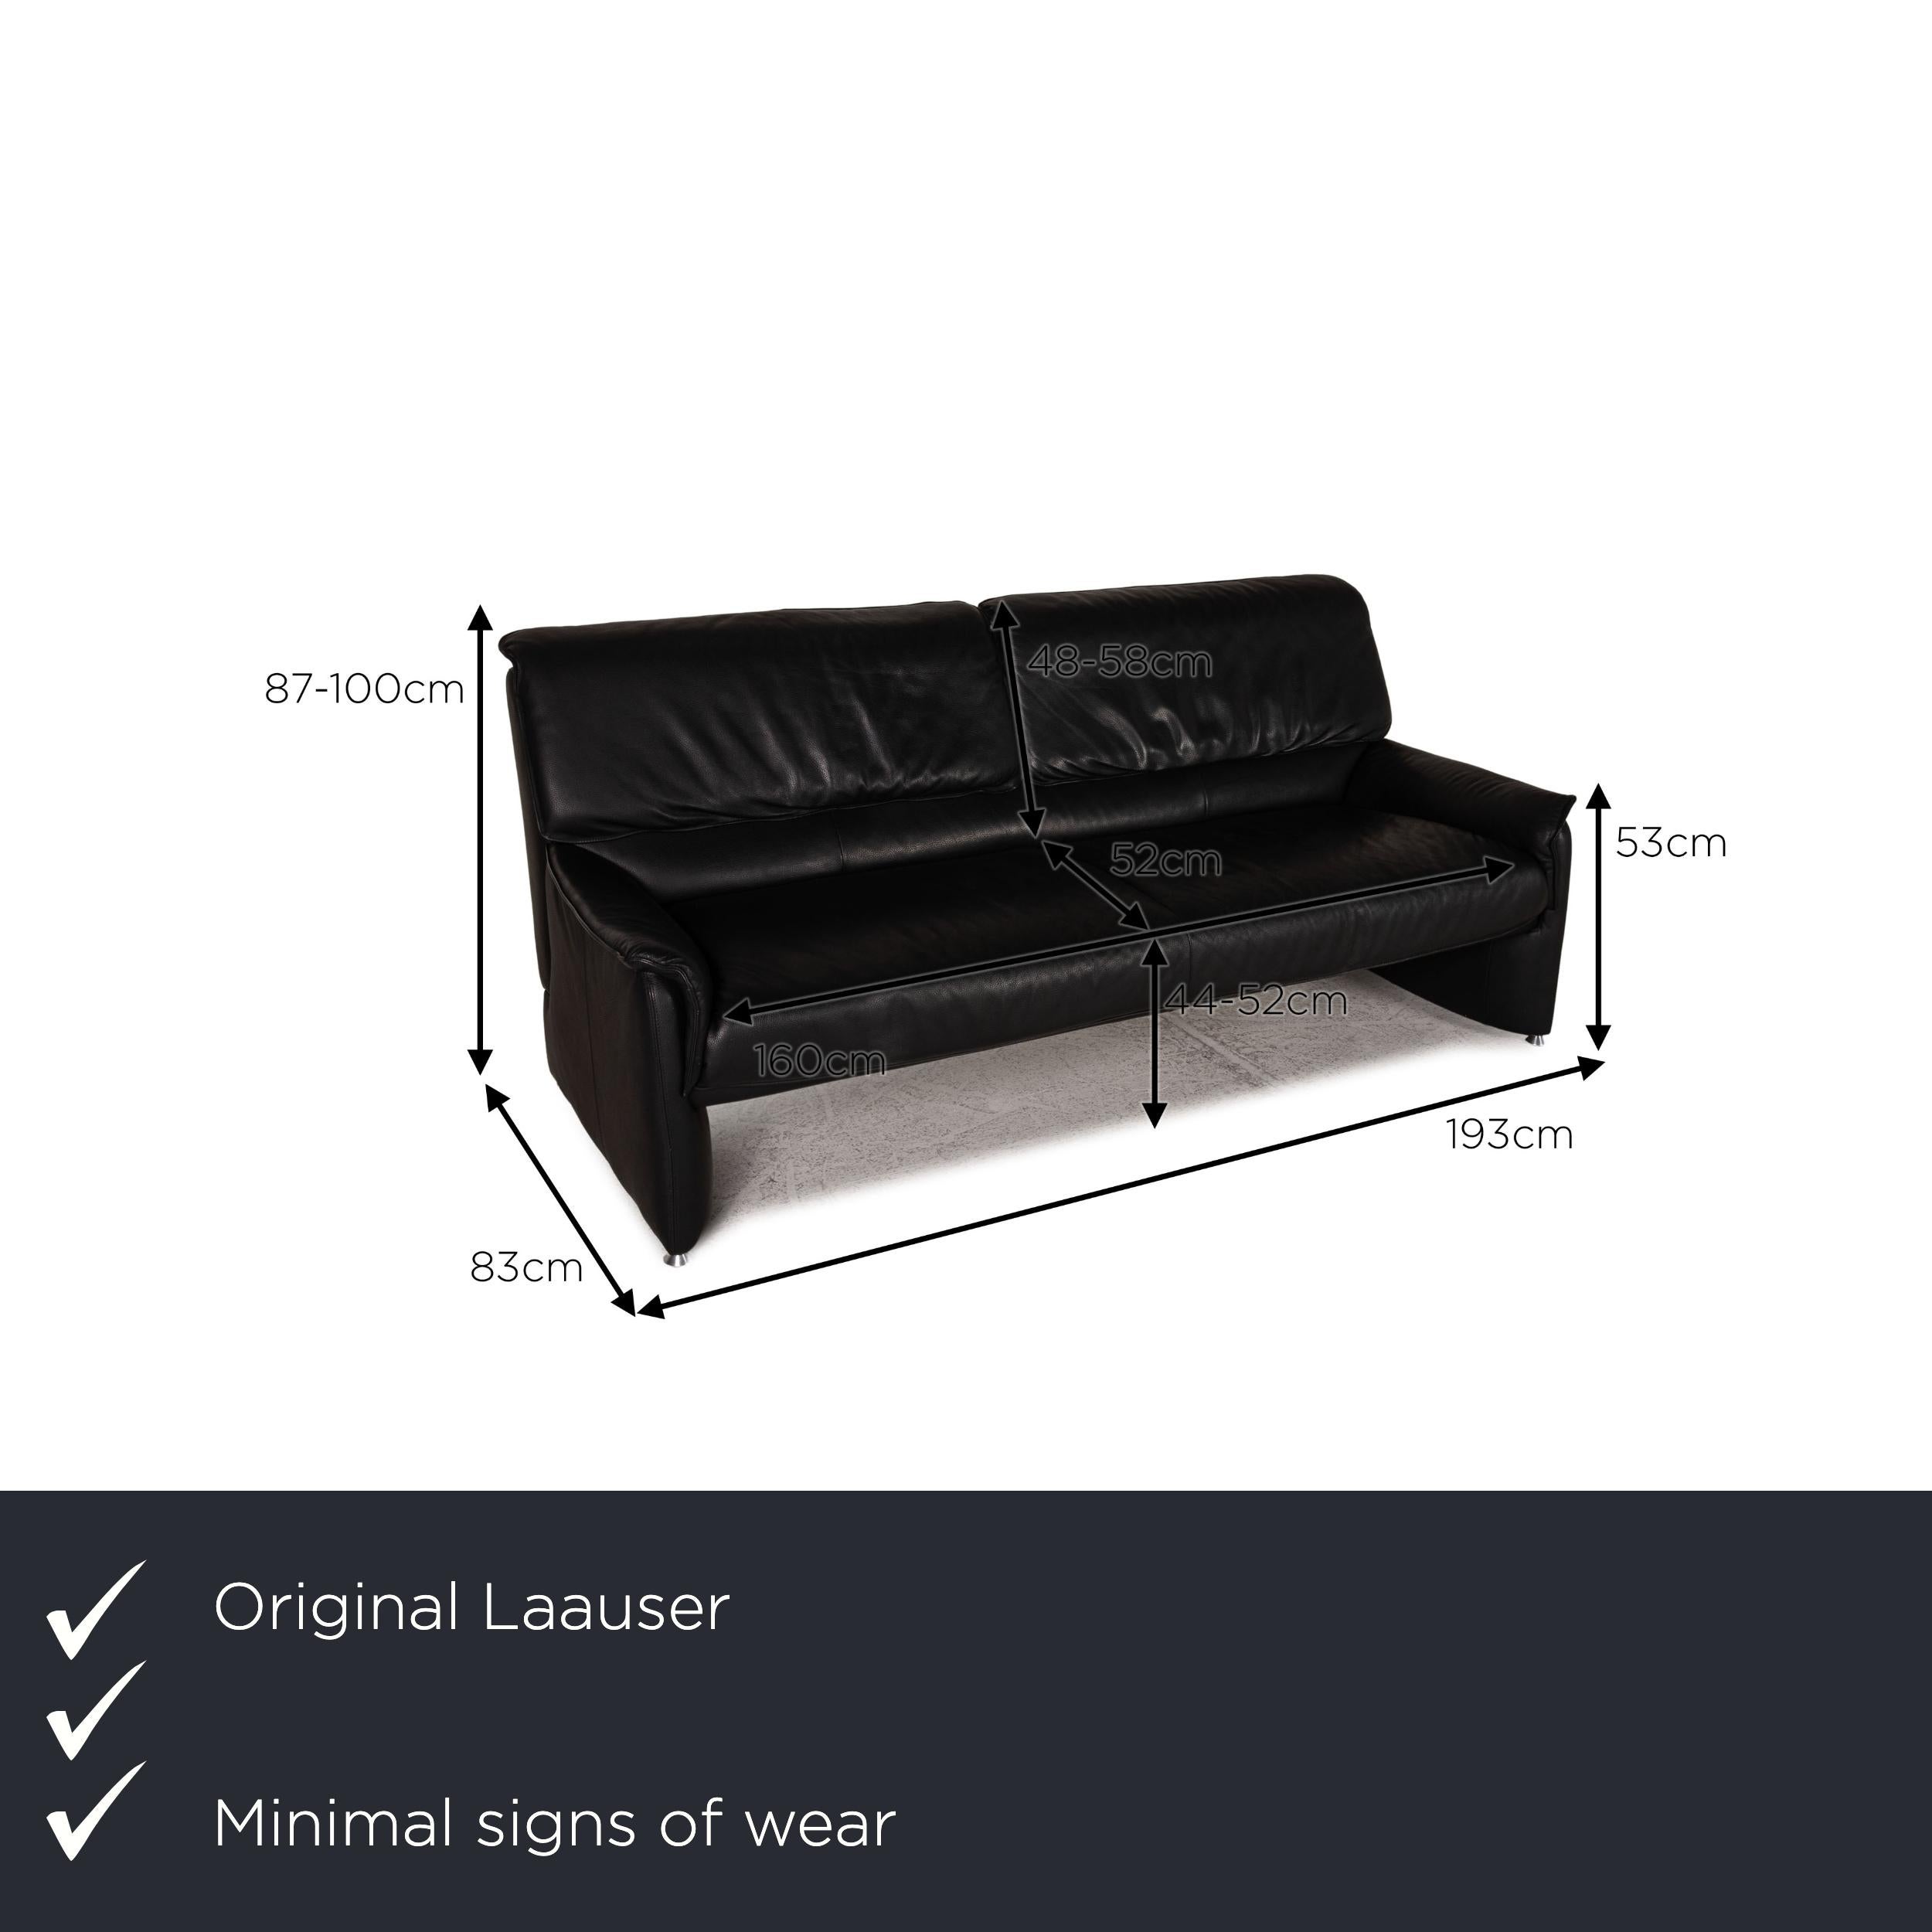 We present to you a Laauser camaro leather sofa black two seater couch.

Product measurements in centimeters:

Measure: depth: 83
width: 193
height: 87
seat height: 44
rest height: 53
seat depth: 52
seat width: 160
back height: 48.

 